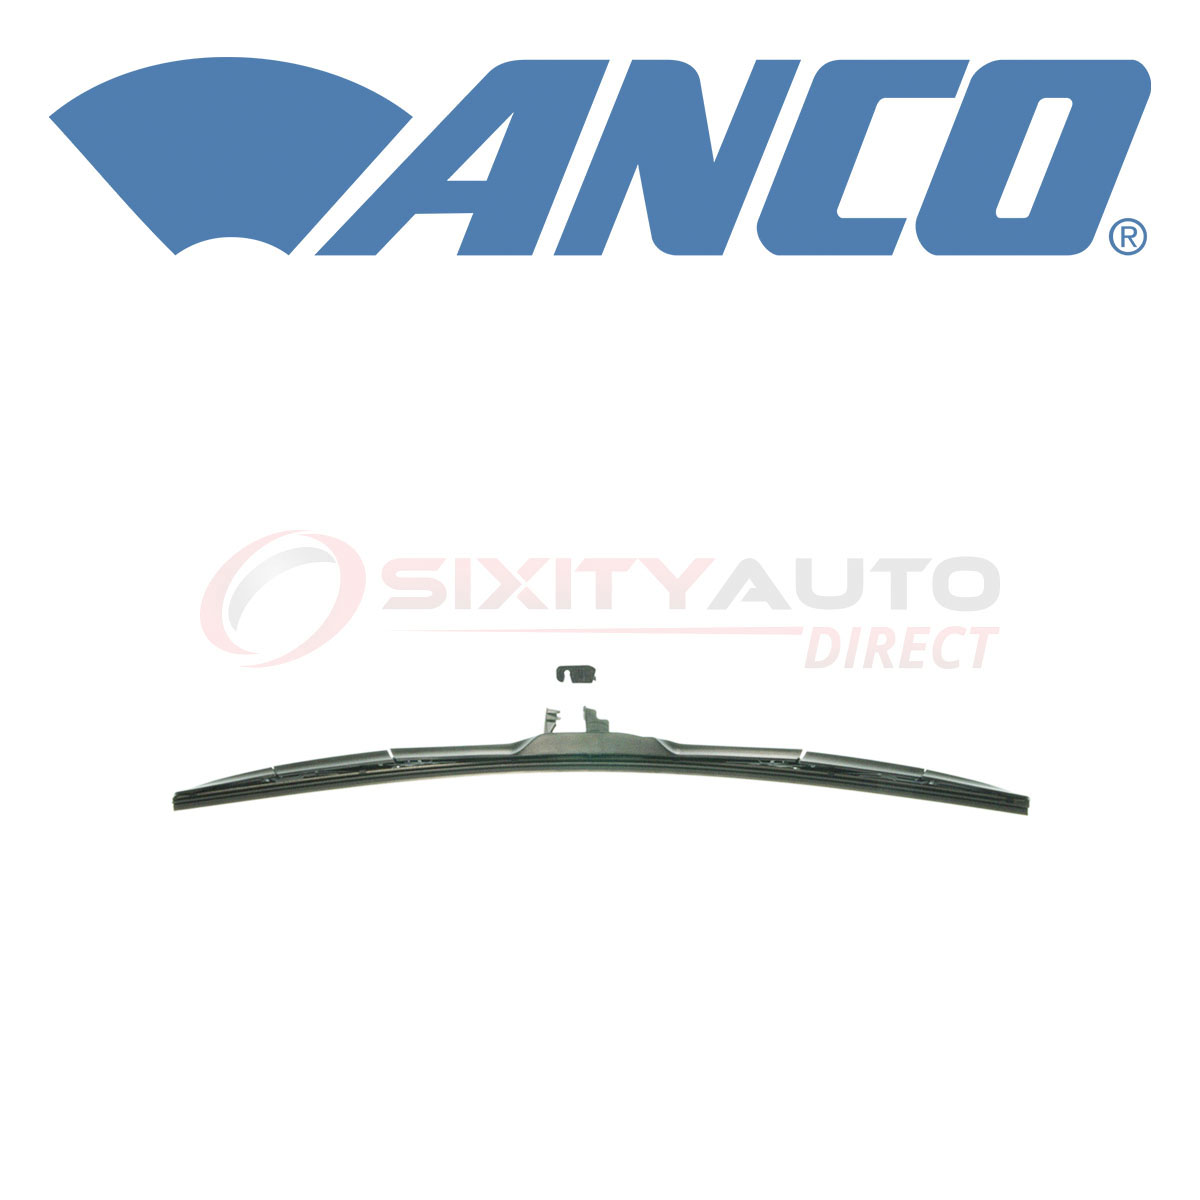 ANCO Transform Windshield Wiper Blade for 2013-2017 Hyundai Santa Fe Sport wq | eBay 2014 Hyundai Santa Fe Sport Windshield Wipers